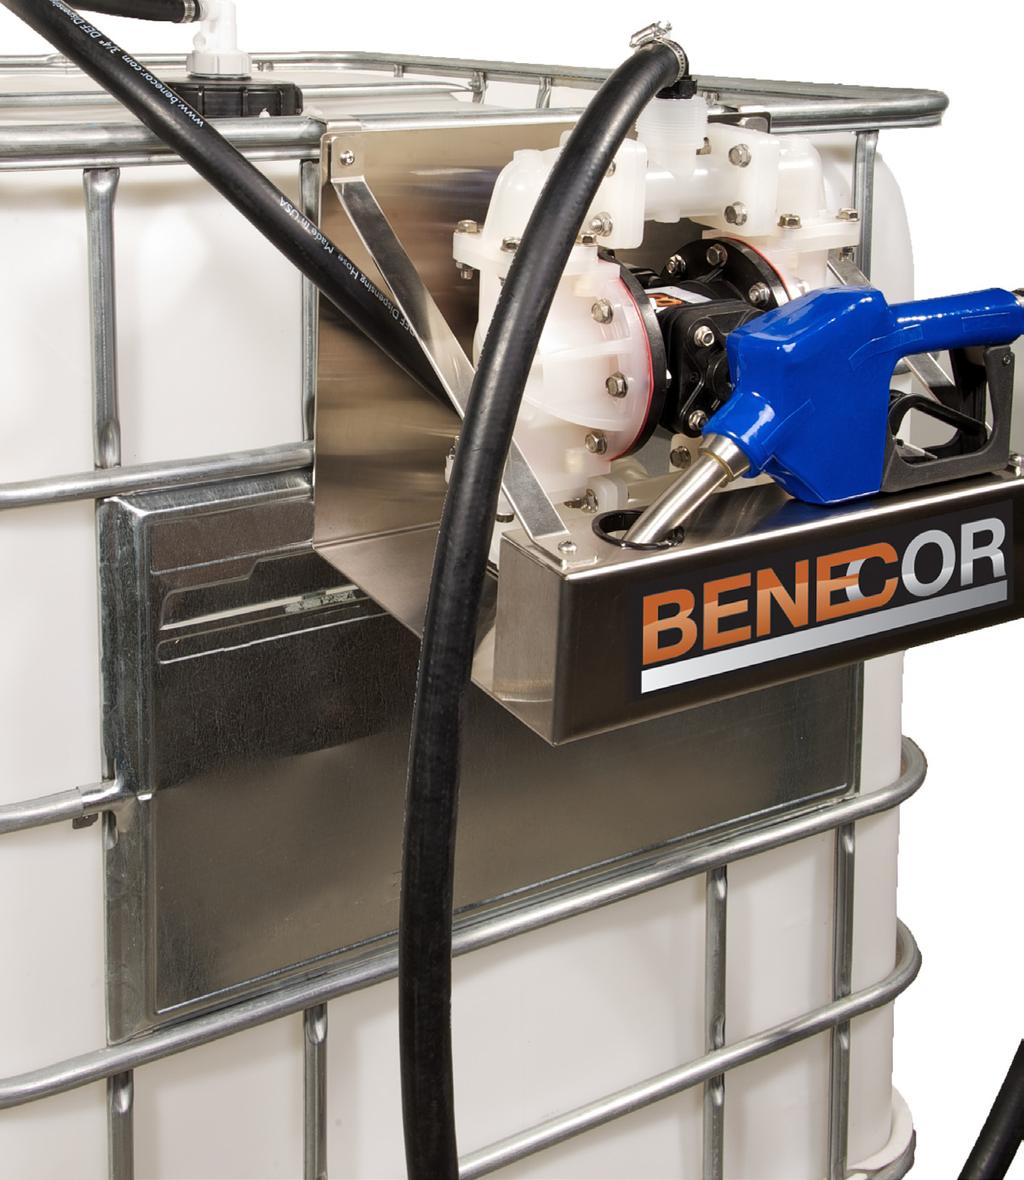 BENECOR DEF DOUBLE DIAPHRAGM AIR PUMP PACKAGE Benecor s Double Diaphragm Air Pump Tote and Barrel Pump Packages deliver the ultimate in flexibility for those who prefer air pumps versus electric.